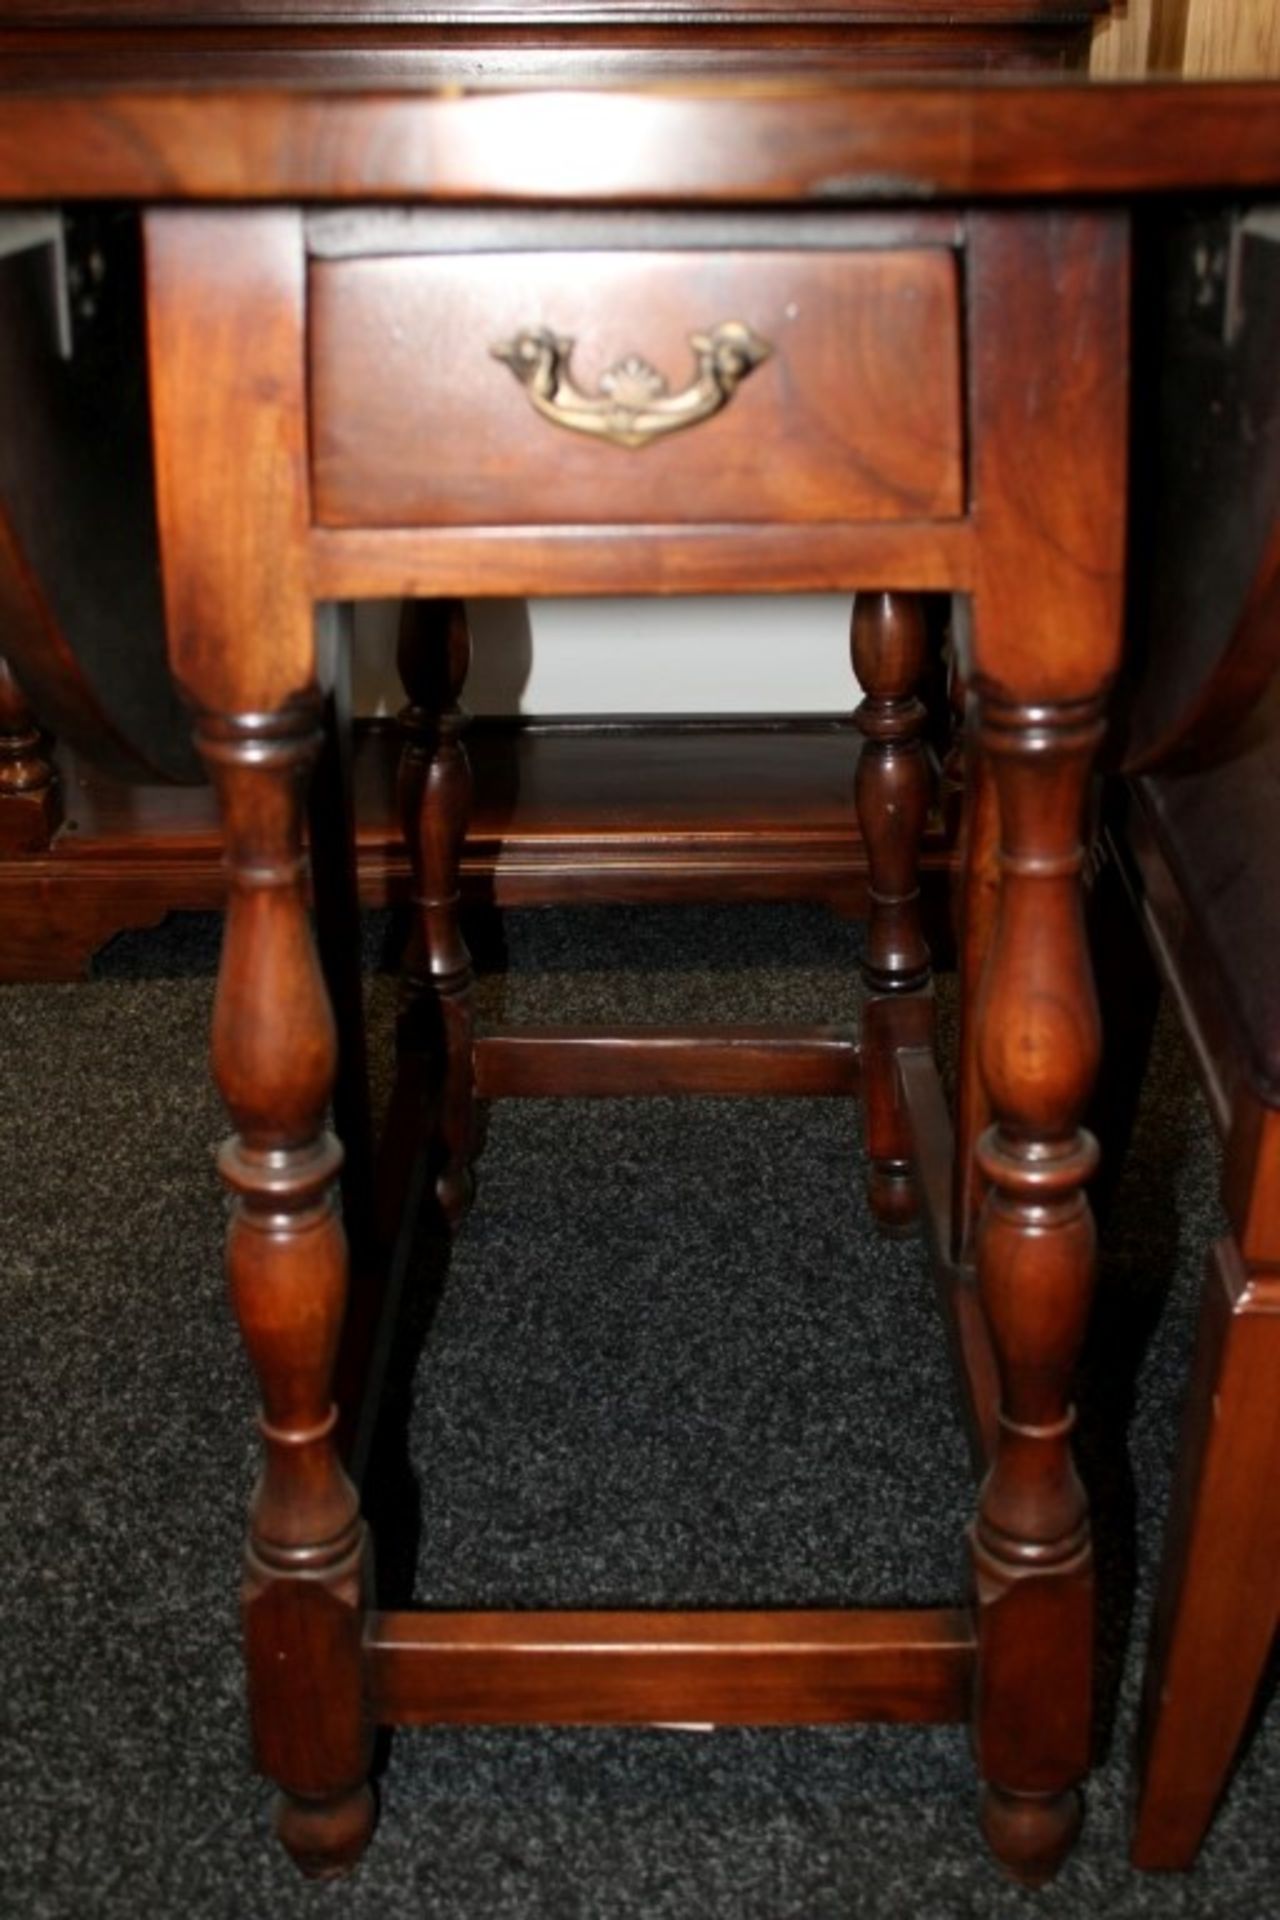 1 x Mark Webster "Burlington" Solid Wood Gate Leg Extending Table With 2-Drawers + 2-Folds - Diamete - Image 7 of 14